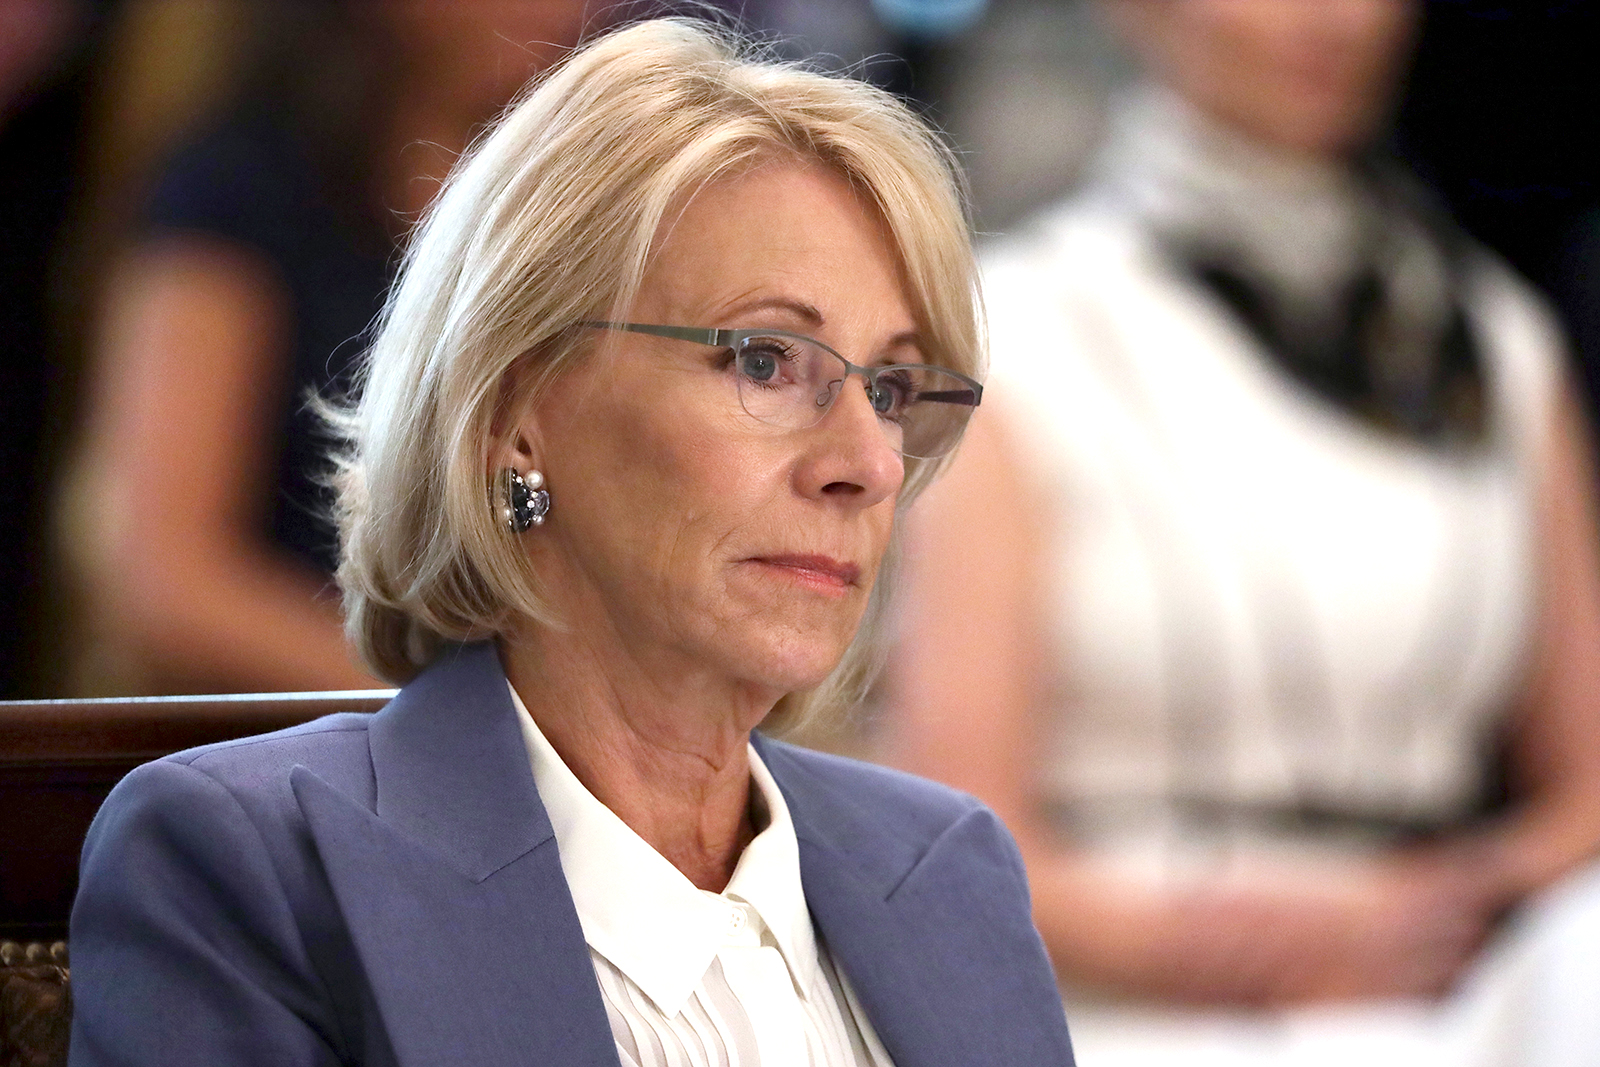 US education secretary says schools must reopen in the fall